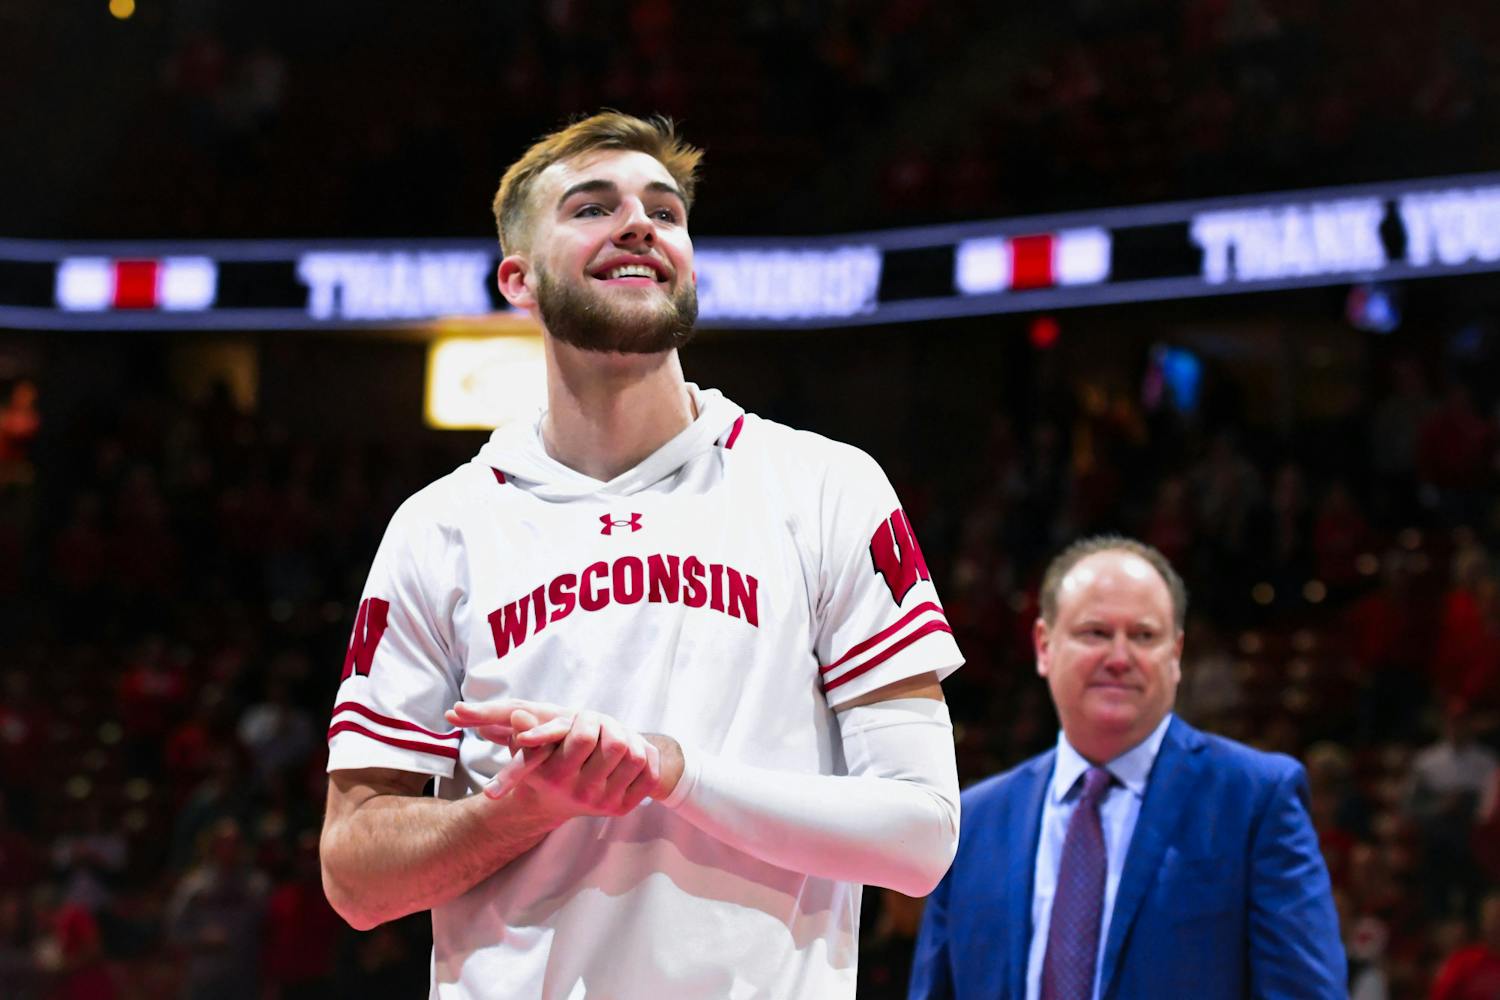 PHOTOS: Wisconsin Men's Basketball secure a win at the last home game in the Kohl Center